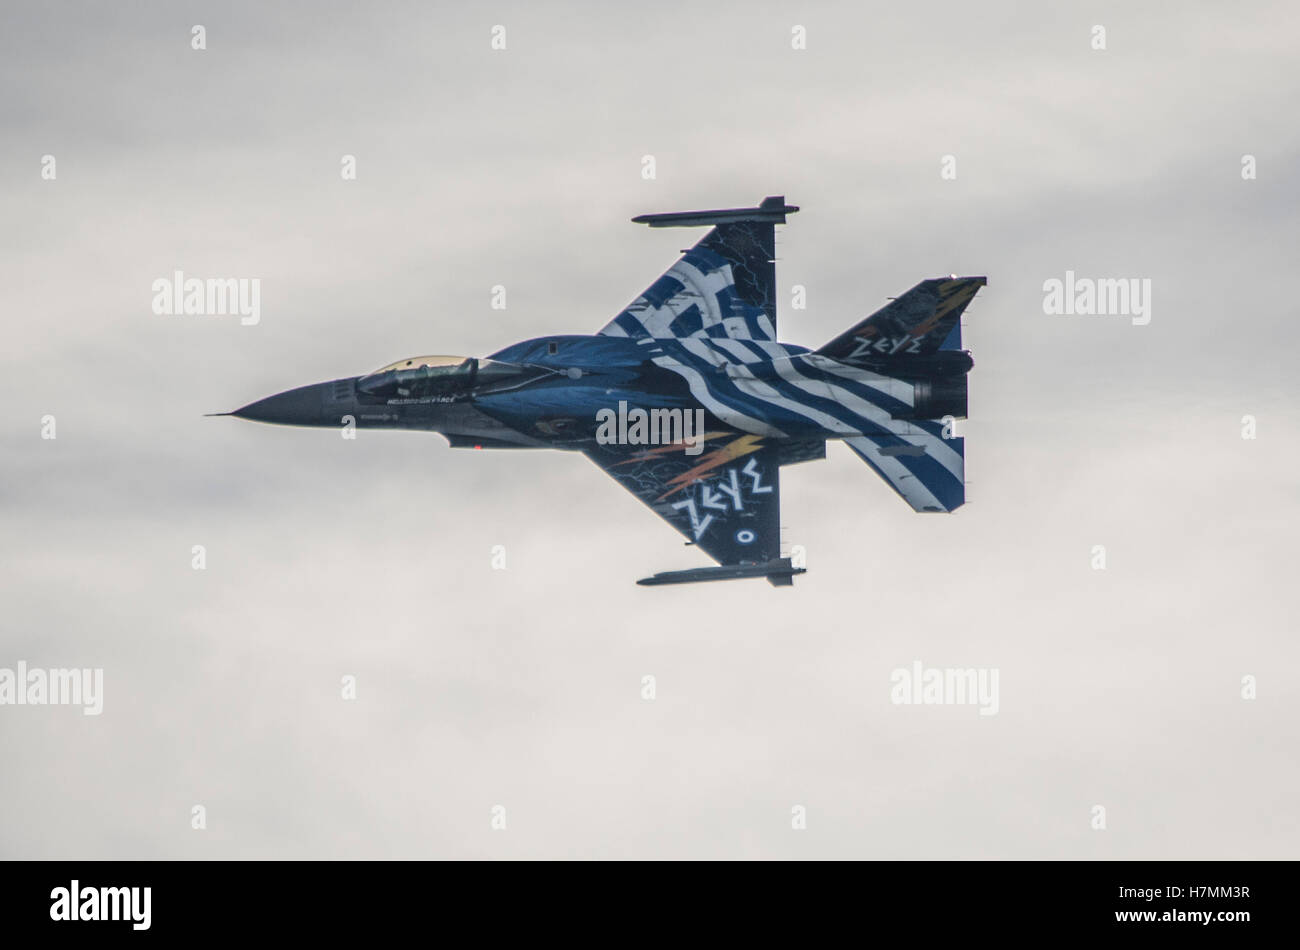 Pireus, Greece. 06th Nov, 2016. A HAF F-16 block 52 Fighting falcon part of the Greek solo display team 'Zeus' during the airshow. Hellenic Air Force Airshow in Flisvos. Hellenic Airforce Celebrates its Patron Saint with an airshow in the Flisvos Region of Pireus. Credit:  George Panagakis/Pacific Press/Alamy Live News Stock Photo